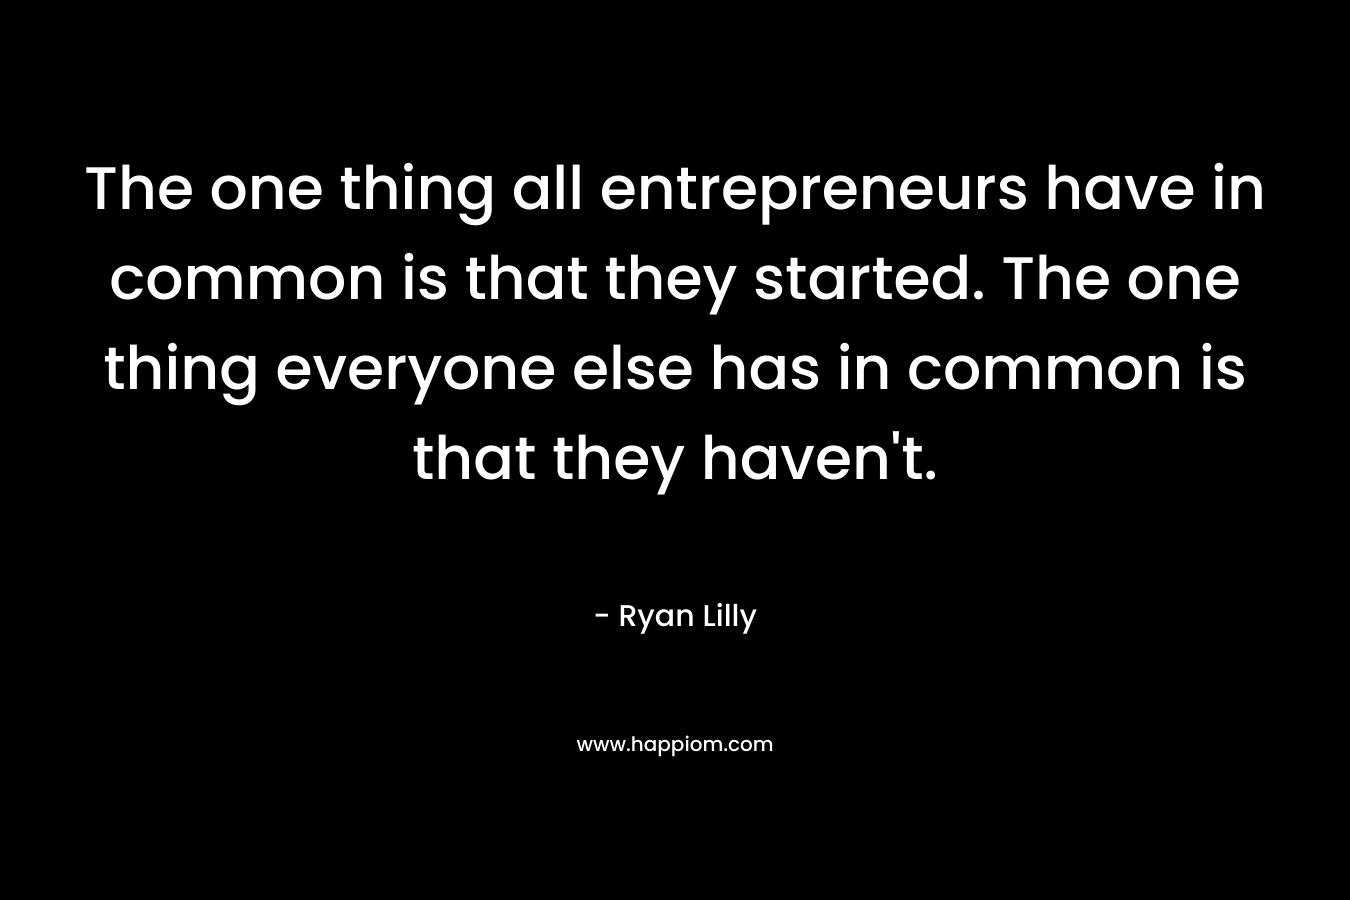 The one thing all entrepreneurs have in common is that they started. The one thing everyone else has in common is that they haven't.